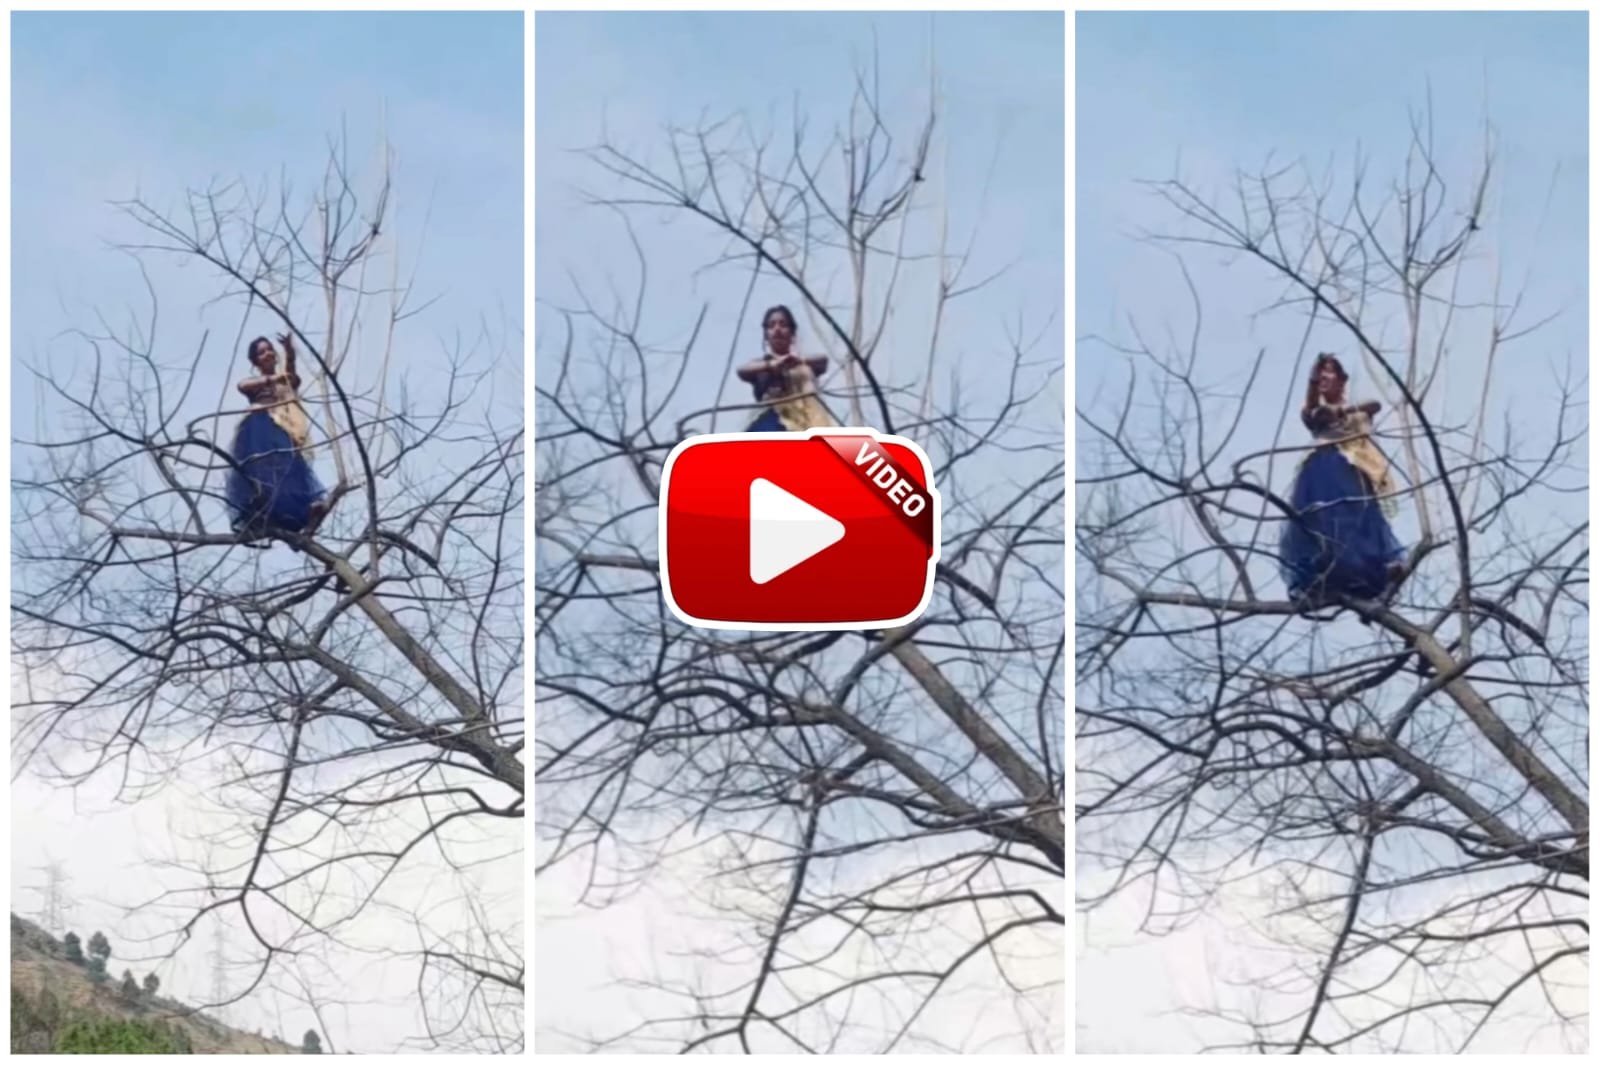 Girl's Dance Video | The girl climbed the branch of a tall tree and started dancing